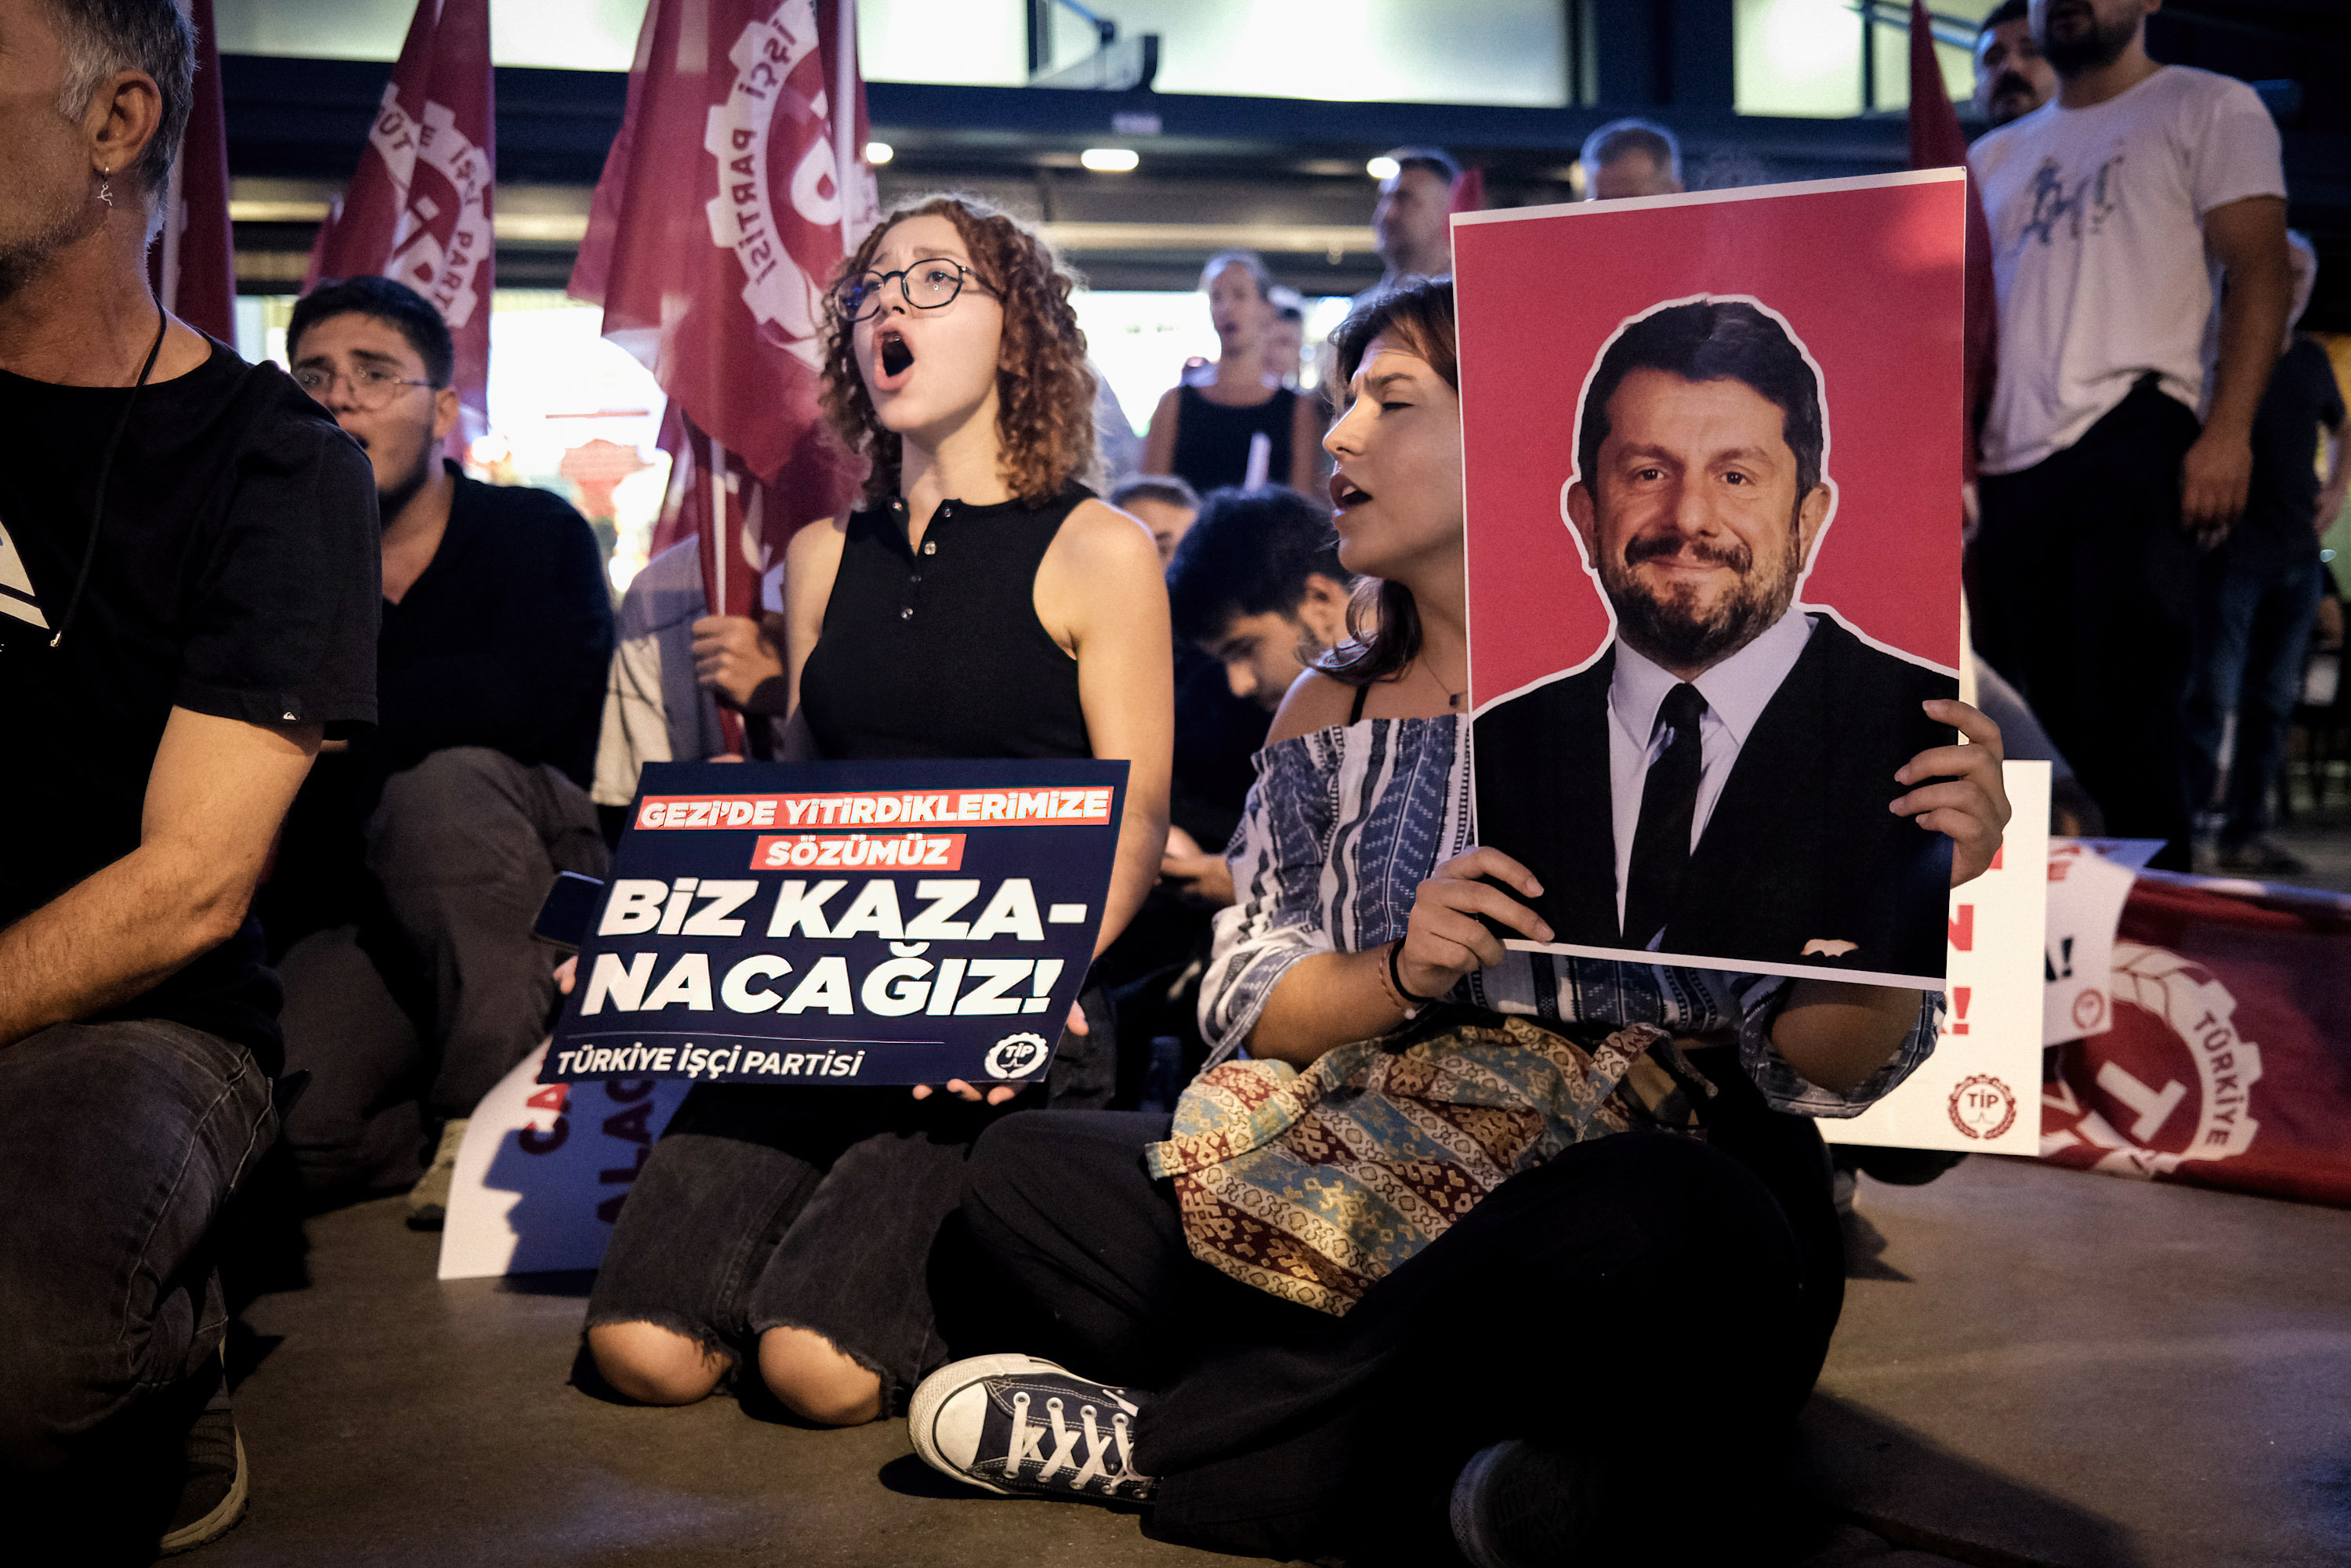 Members of the Workers' Party of Turkey TIP hold up placards, flags and photos of Can Atalay during a pro-Atalay sit-in protest, Izmir, Turkey, 29 September 2023